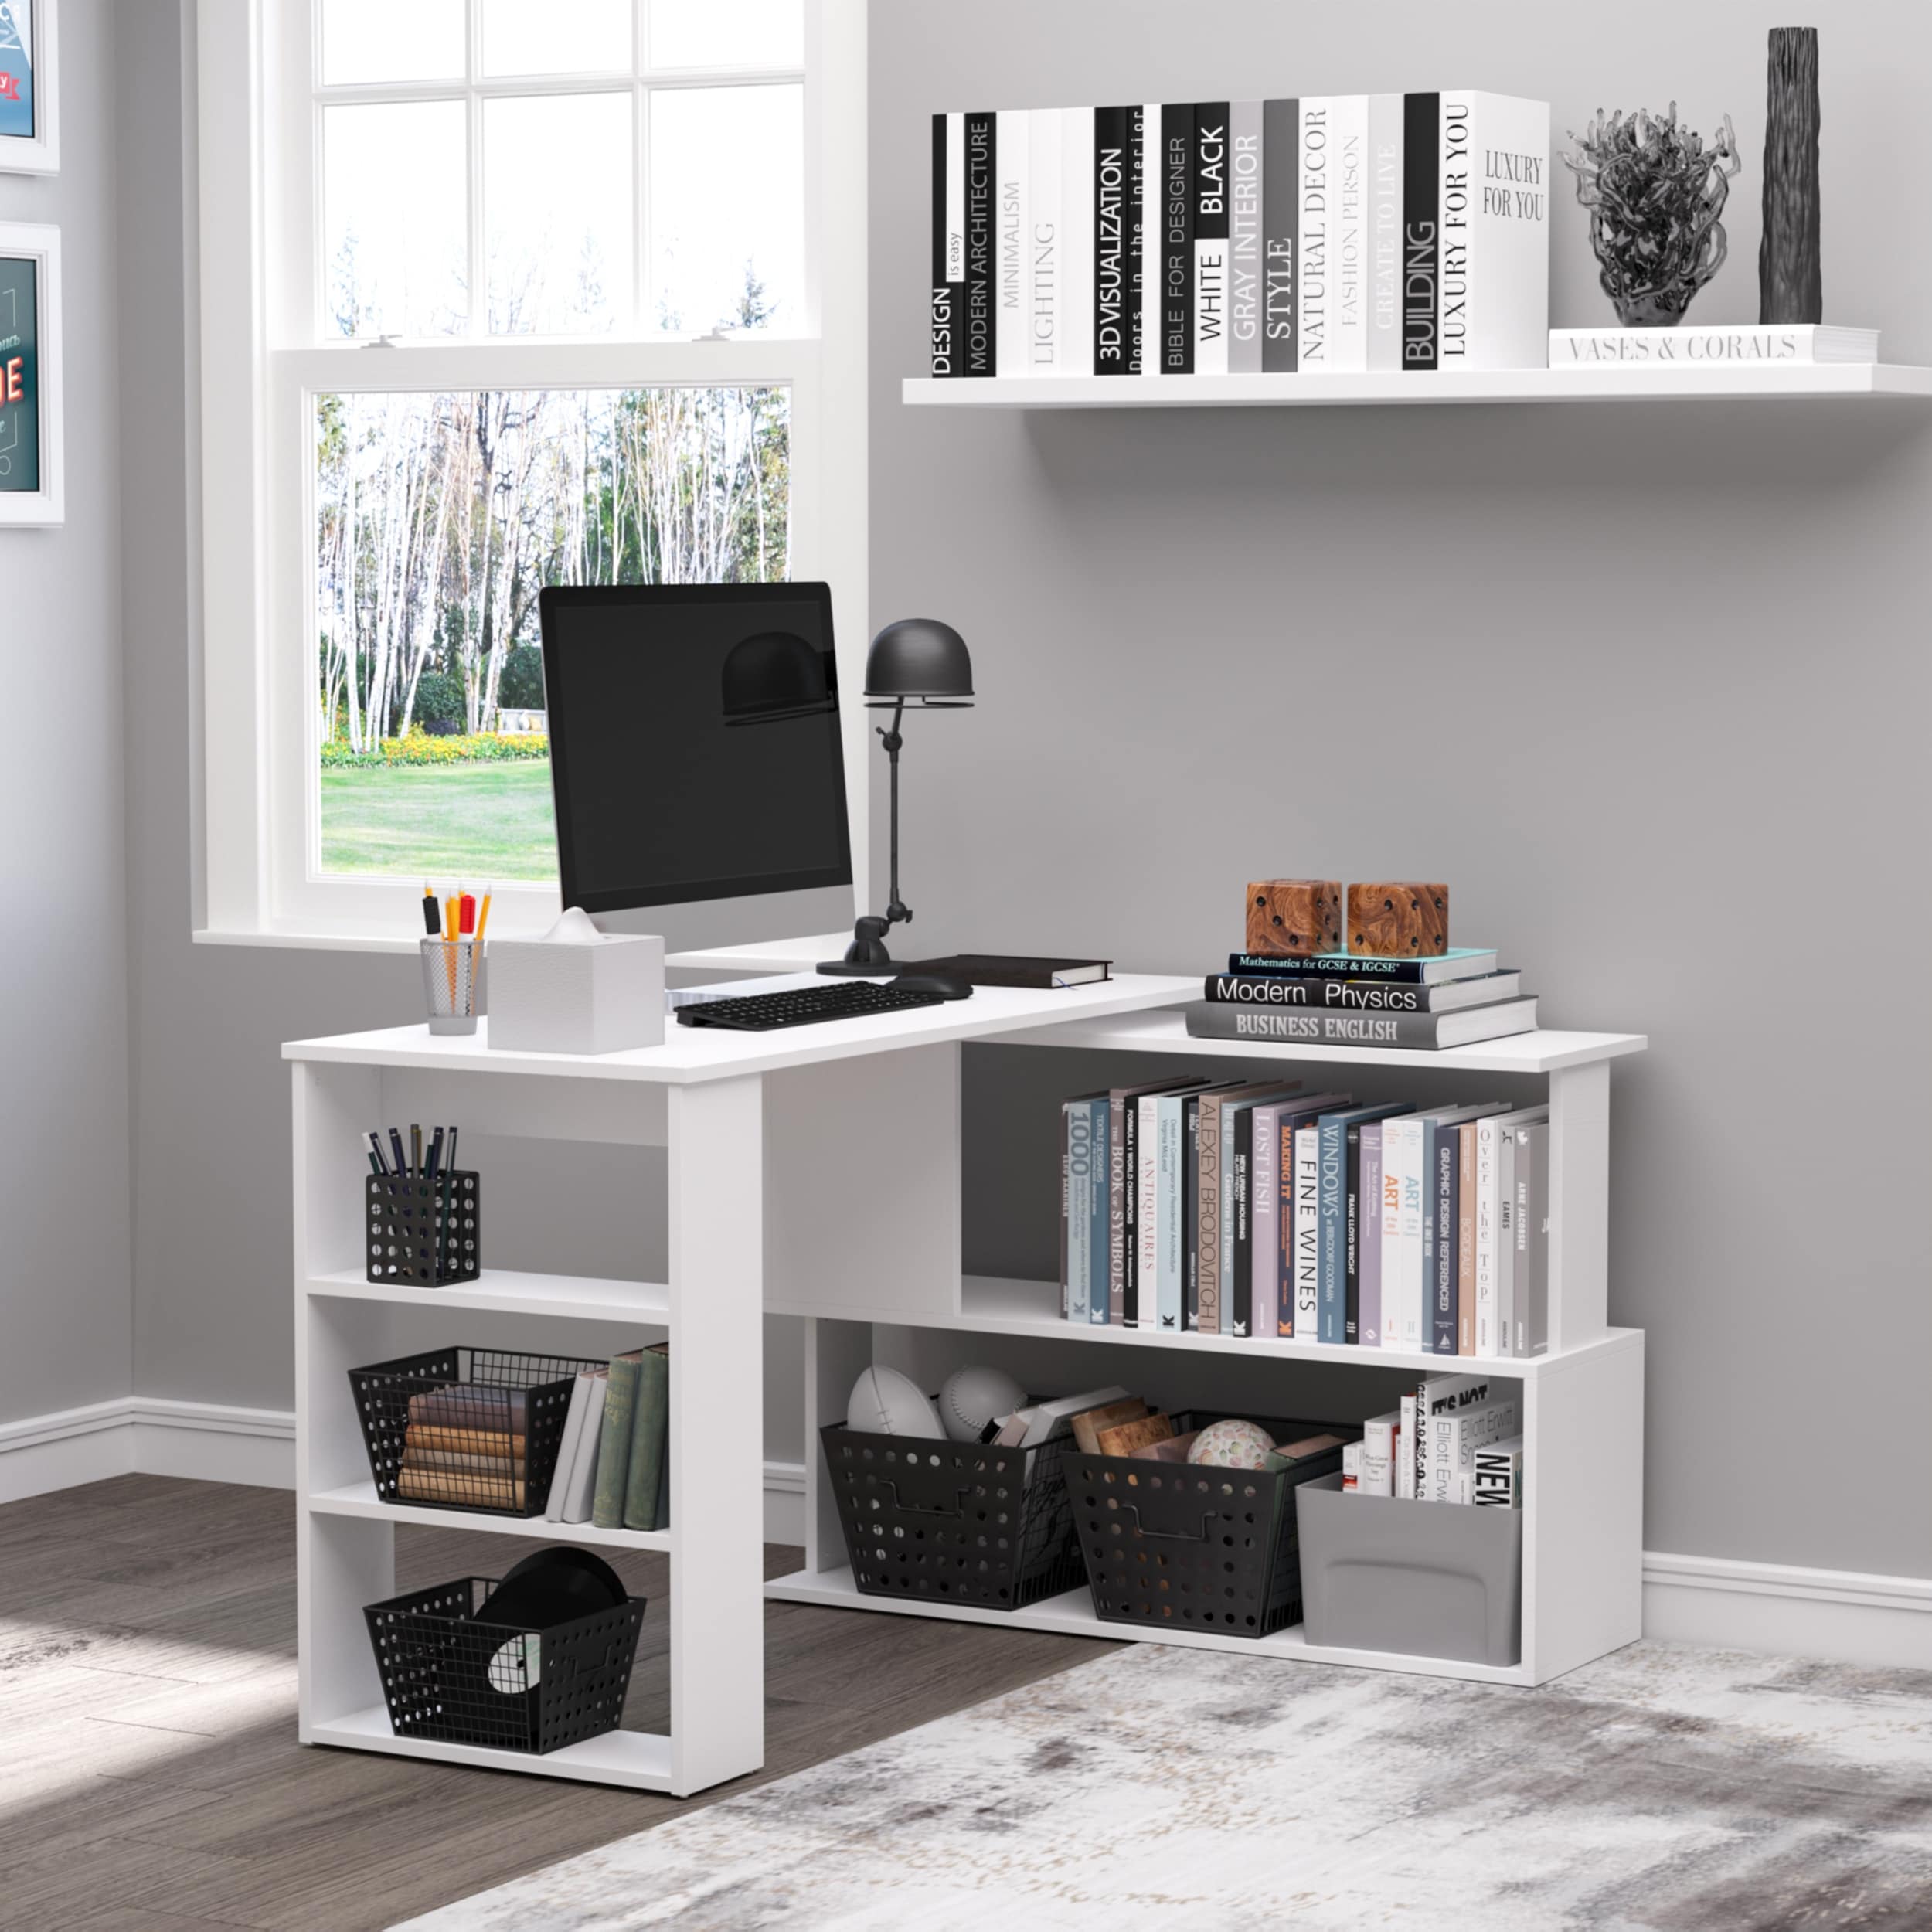 Folding Computer Desk with Storage Shelves, 360 Rotating L-Shape Corner Desk for Home Office Small Space - White